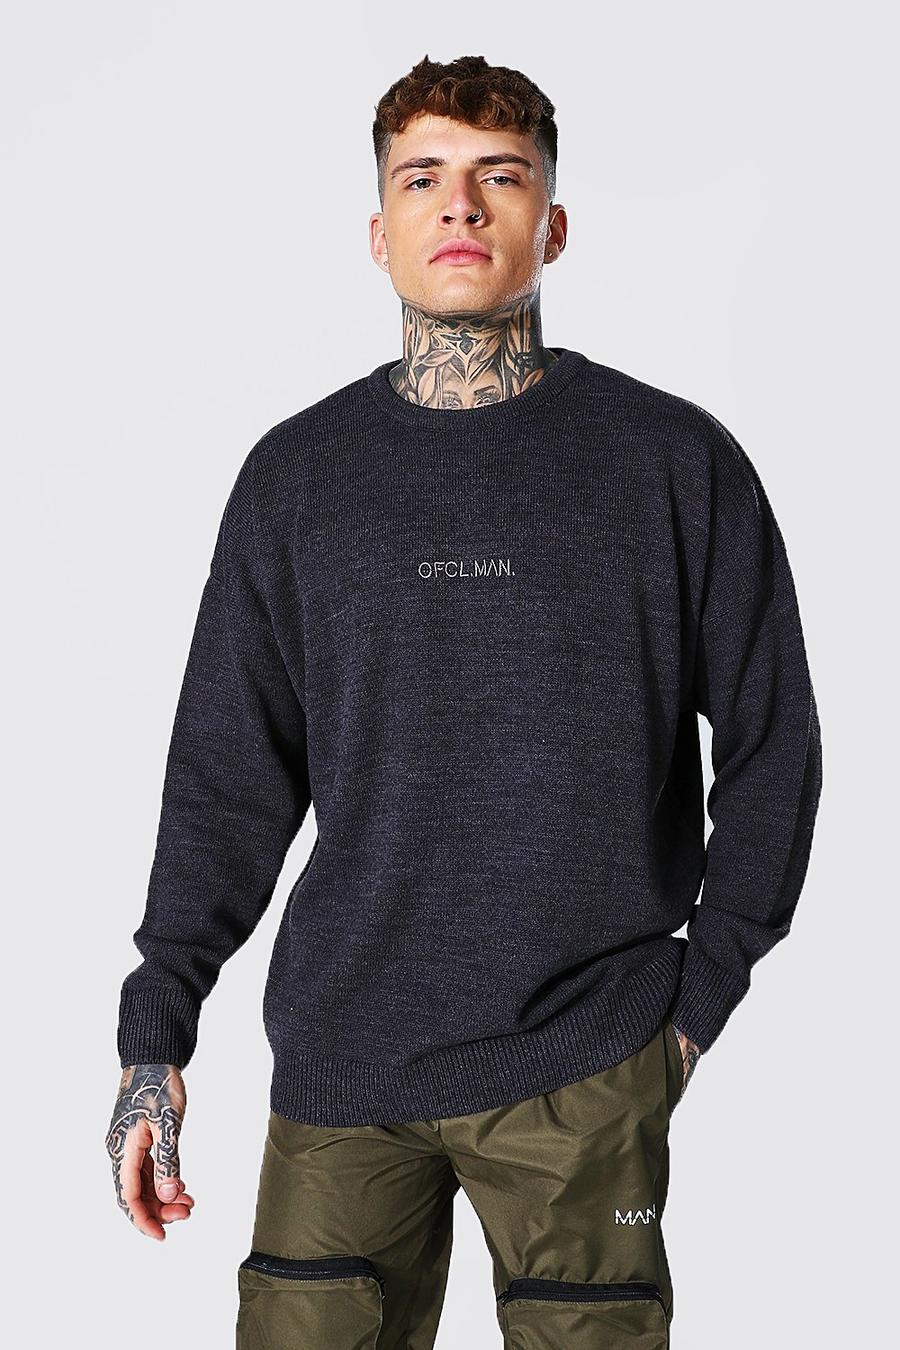 Charcoal Oversized Ofcl Man Tonal Embroidered Sweater image number 1